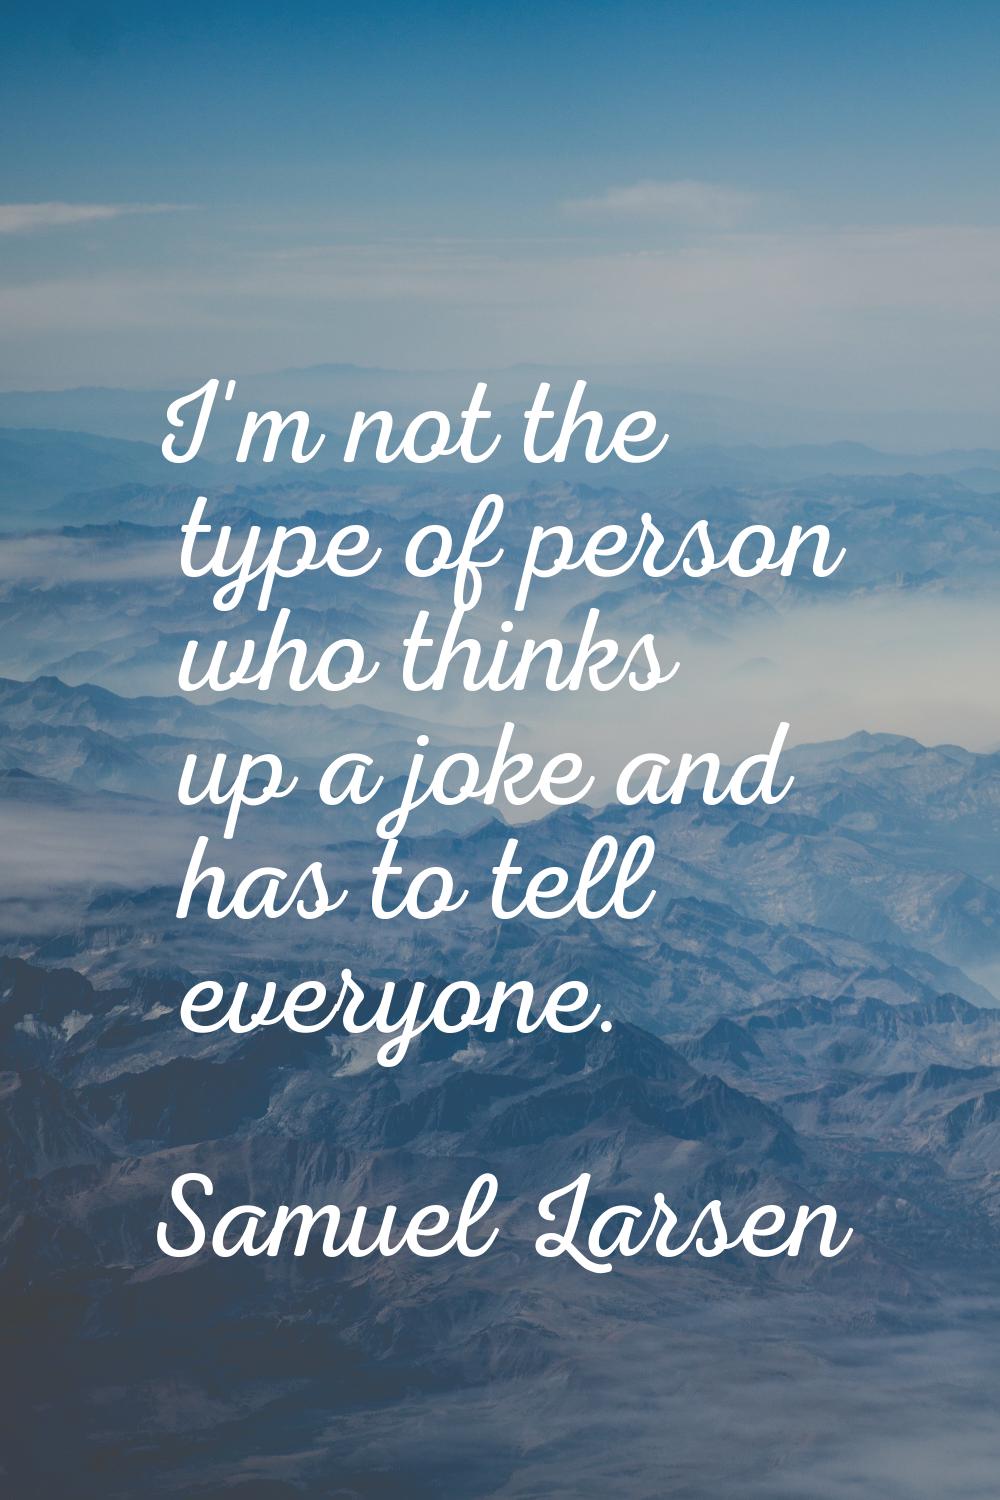 I'm not the type of person who thinks up a joke and has to tell everyone.